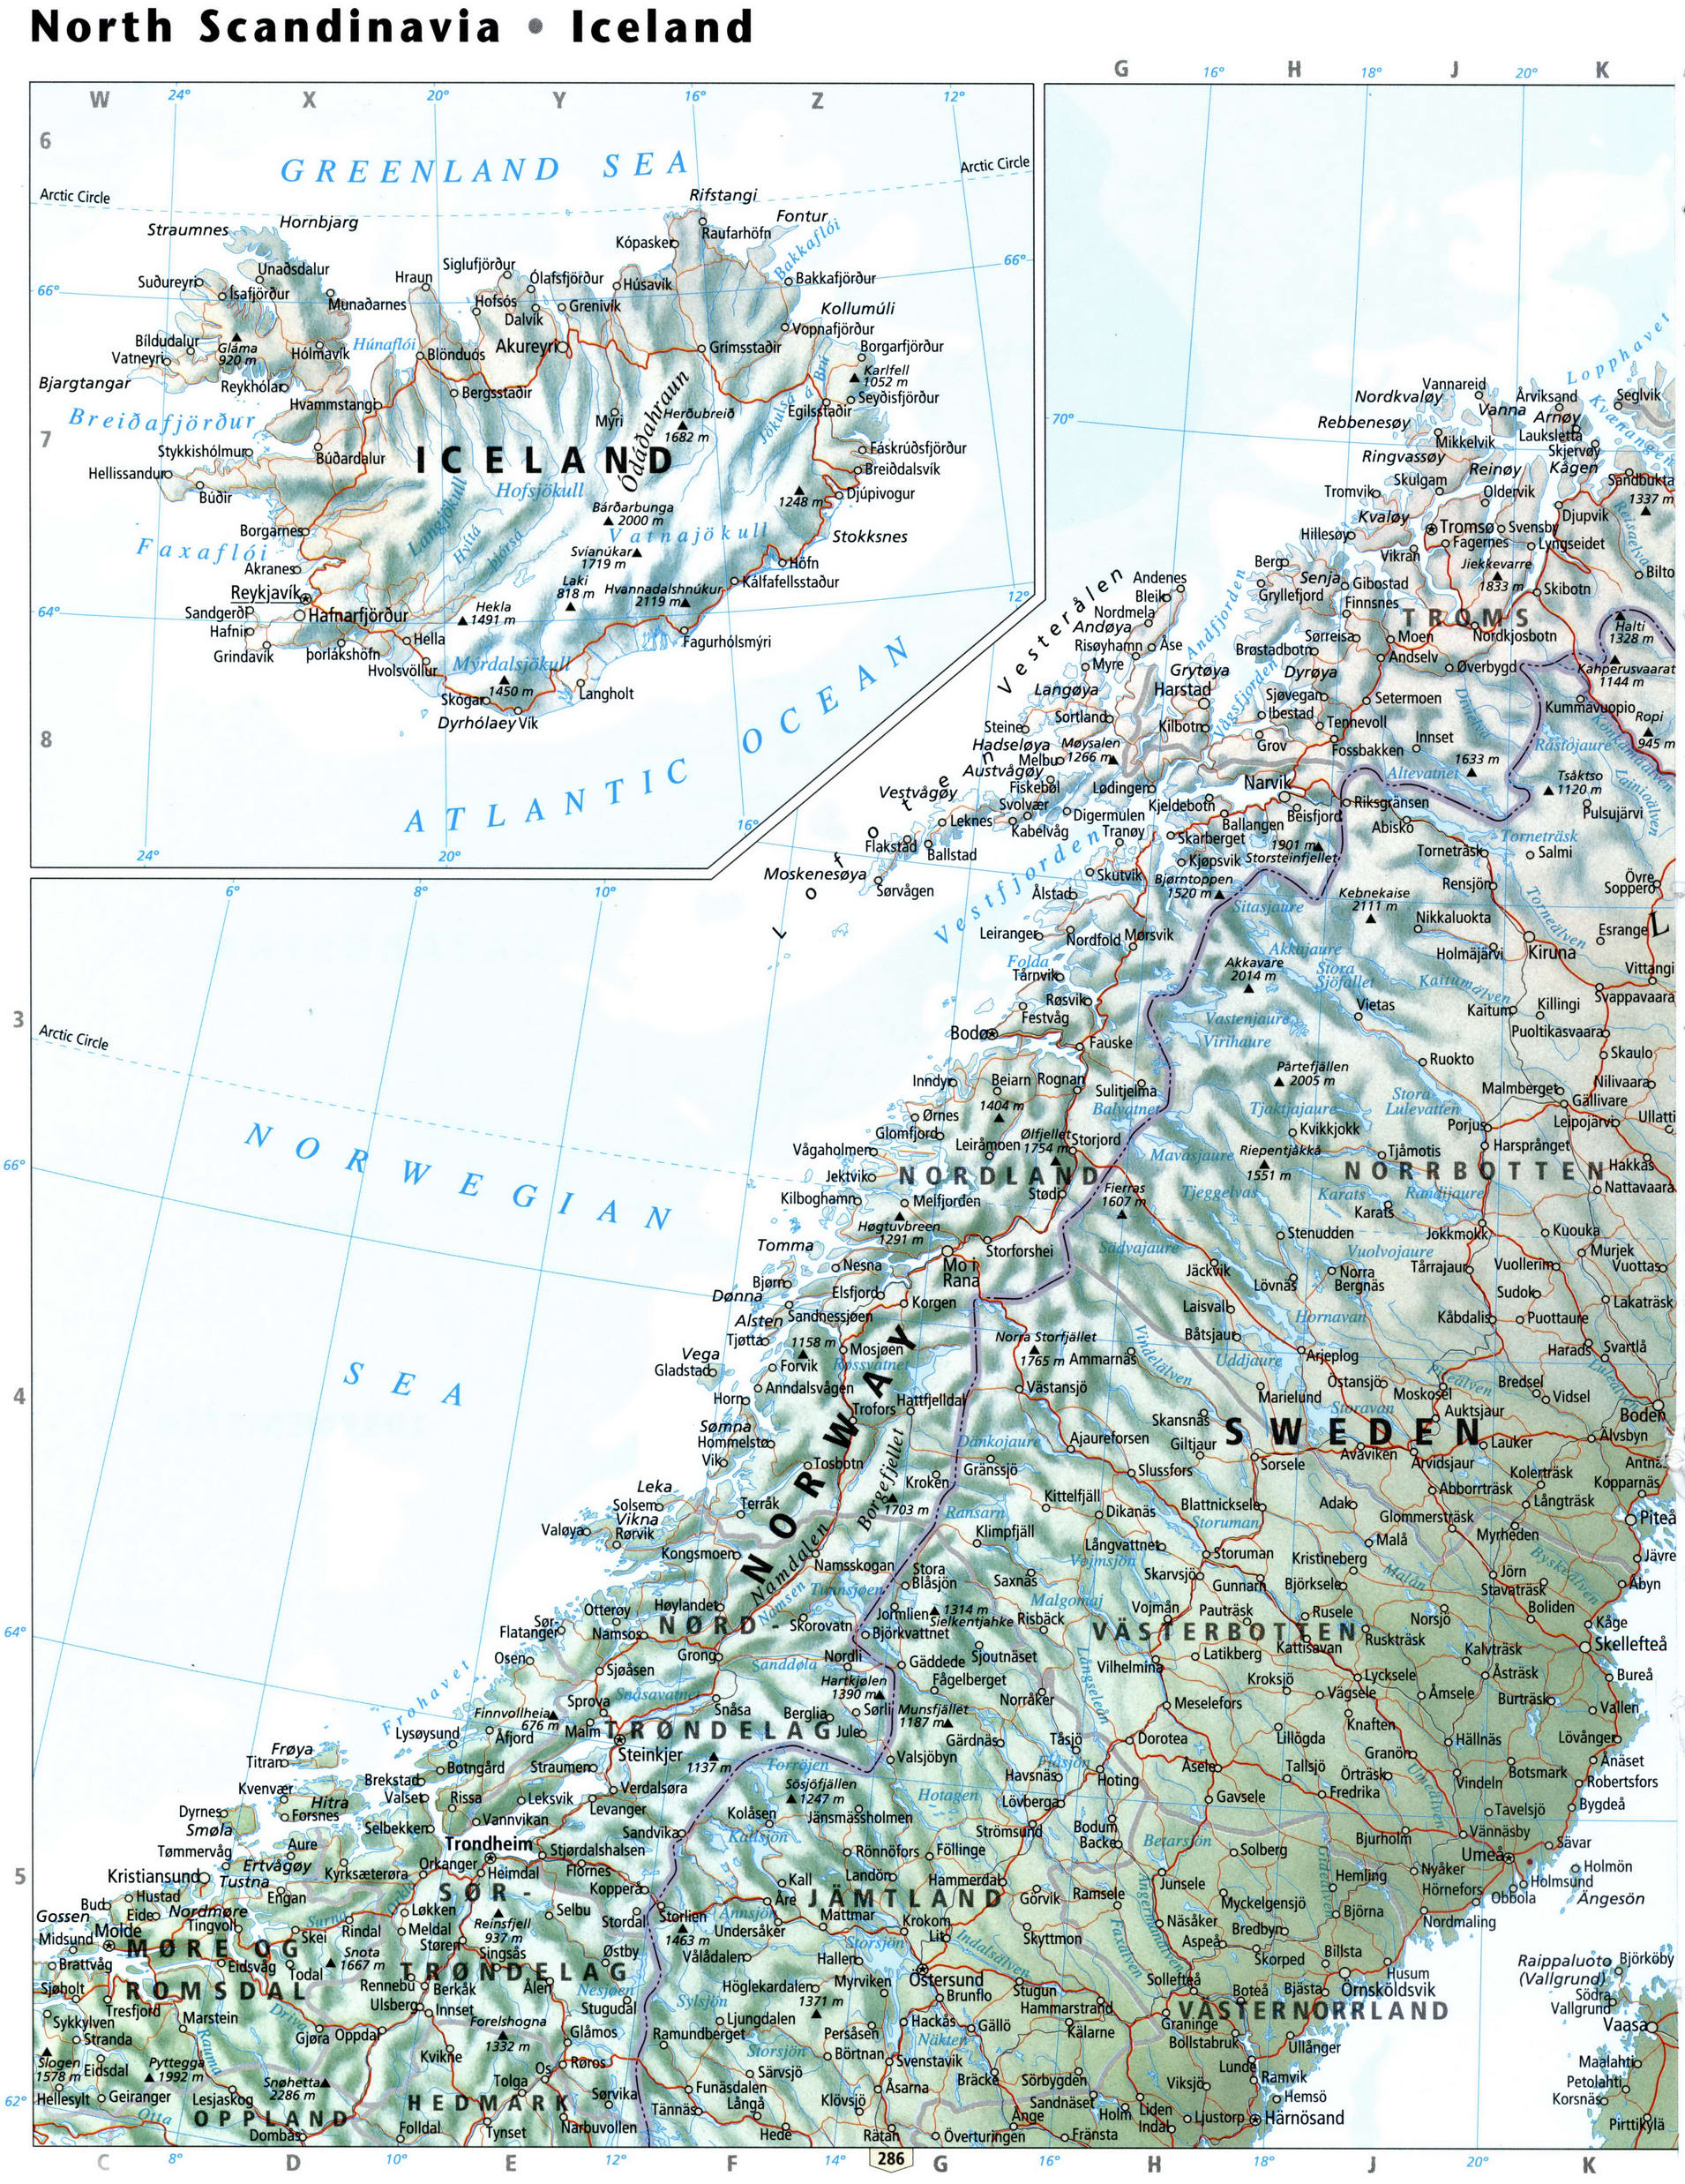 Iceland and North Scandinavia map